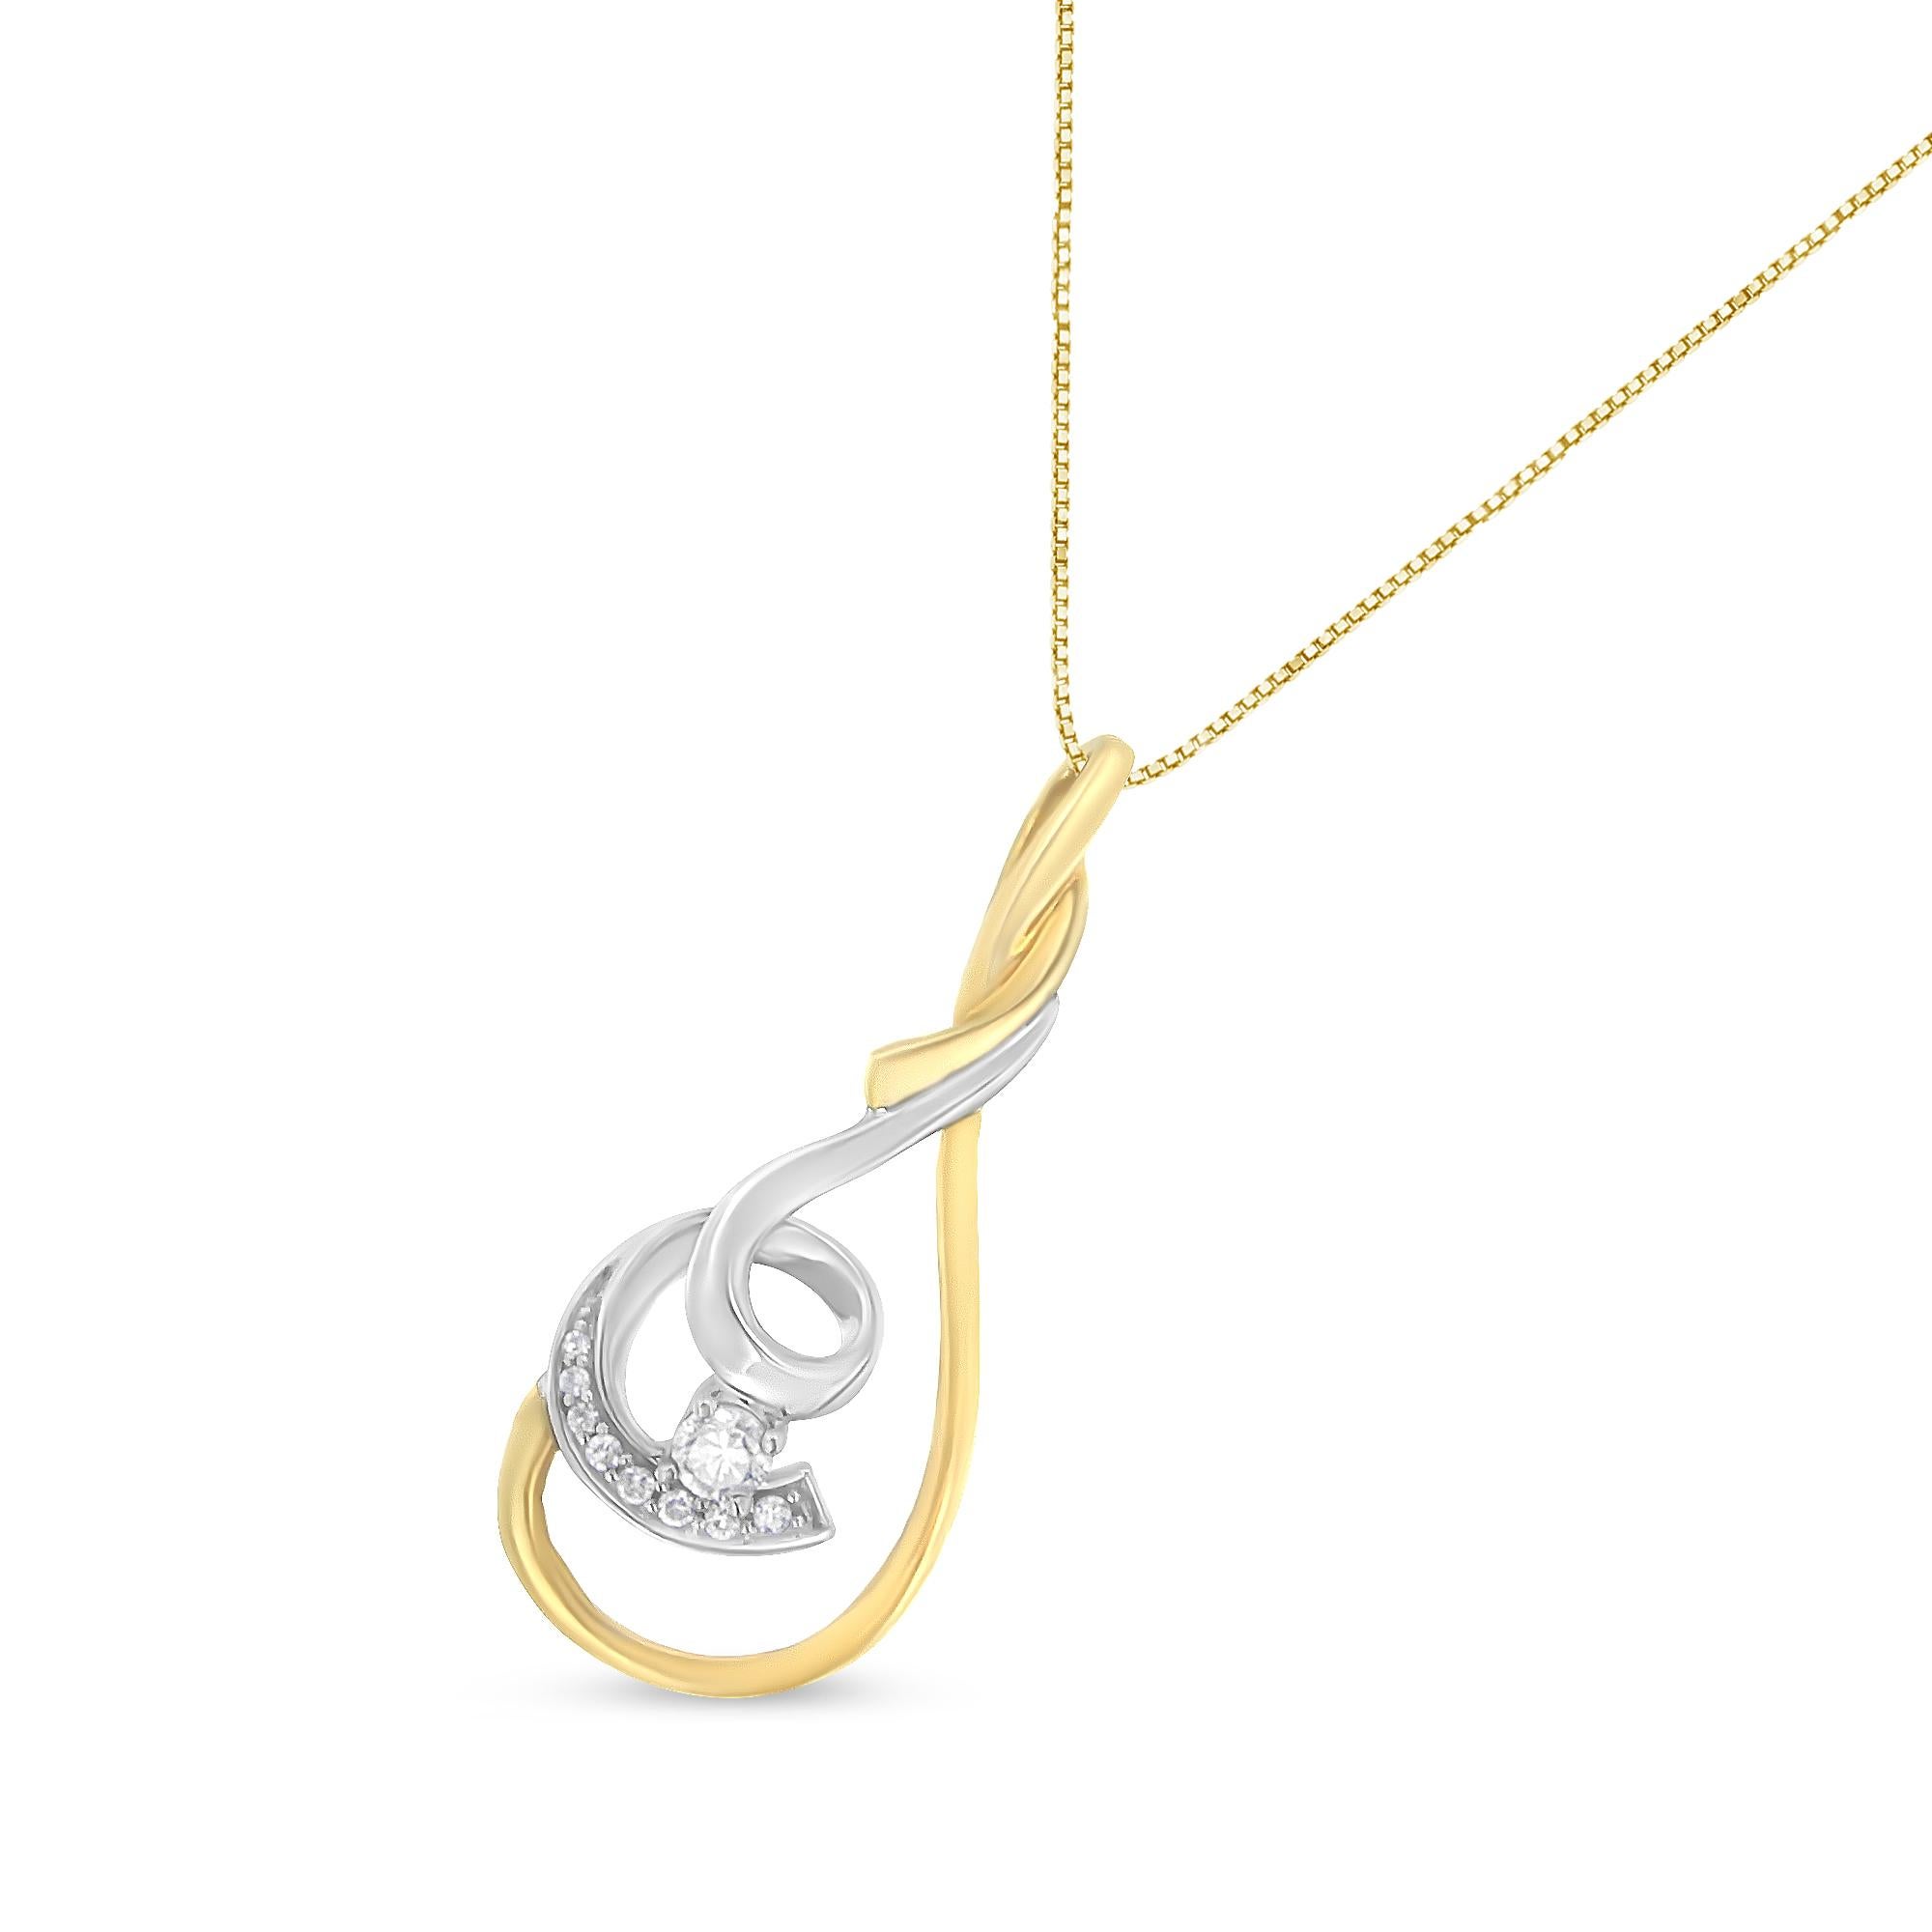 Modern 10k Two-Toned Gold 1/6 Carat Diamond Spiral Pendant Necklace For Sale